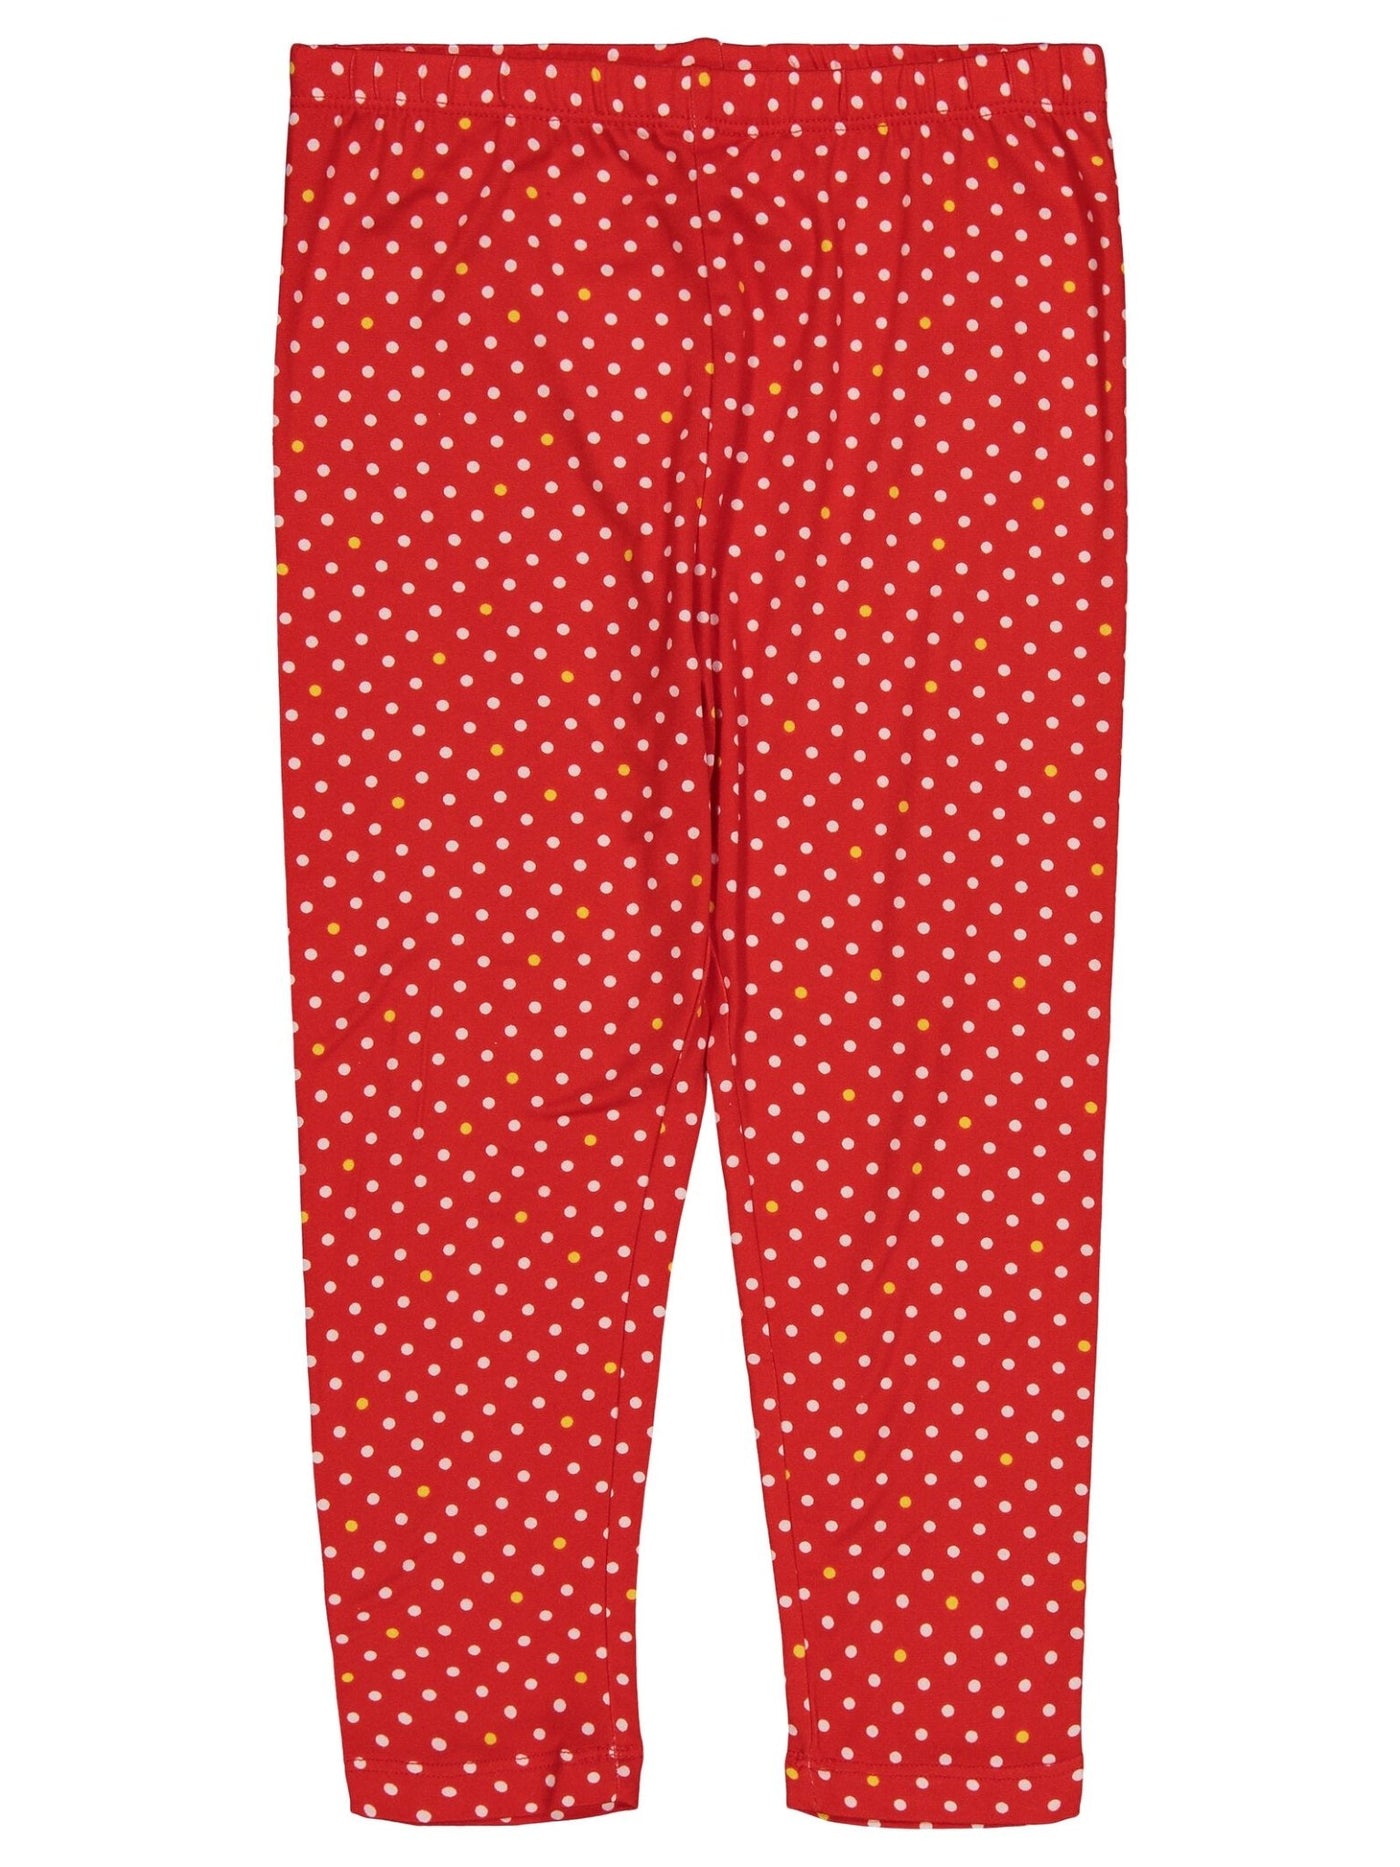 Disney Minnie Mouse T-Shirts Leggings and Shorts 4 Piece Outfit Set - imagikids